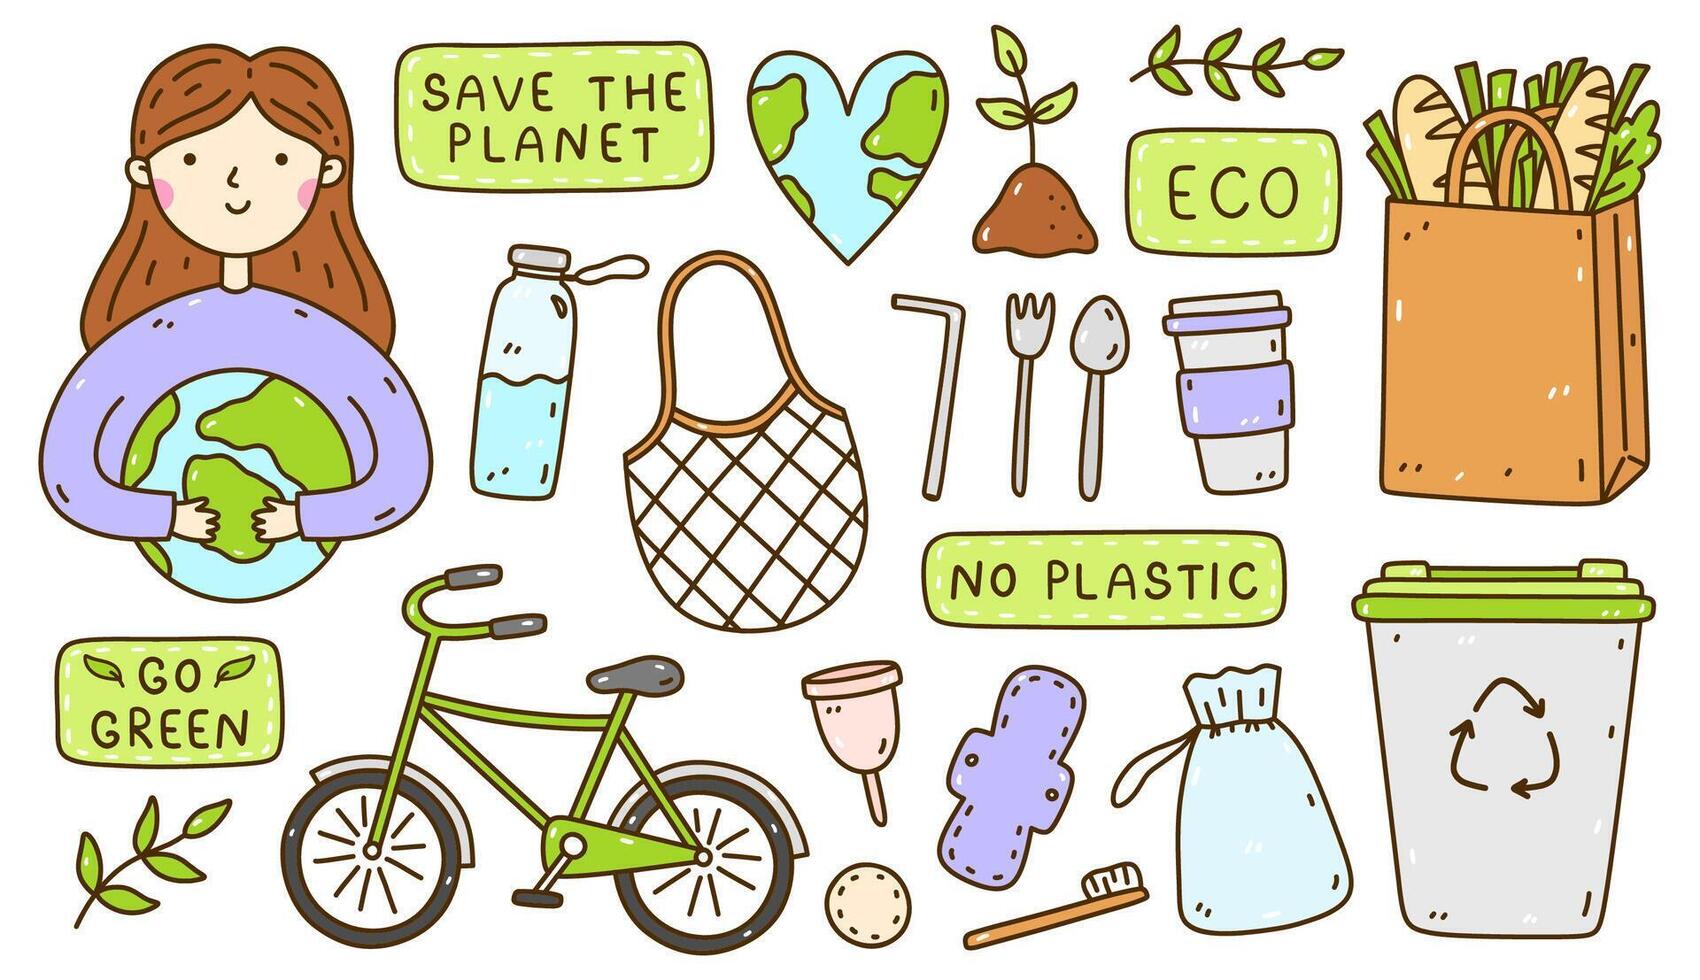 Set of Go green, Save the Planet doodles. A girl holding the Earth in her hands, heart-shaped planet, bicycle,  mesh bag, steel cutlery, reusable items, plant seedling. Zero waste, ecology concept. vector